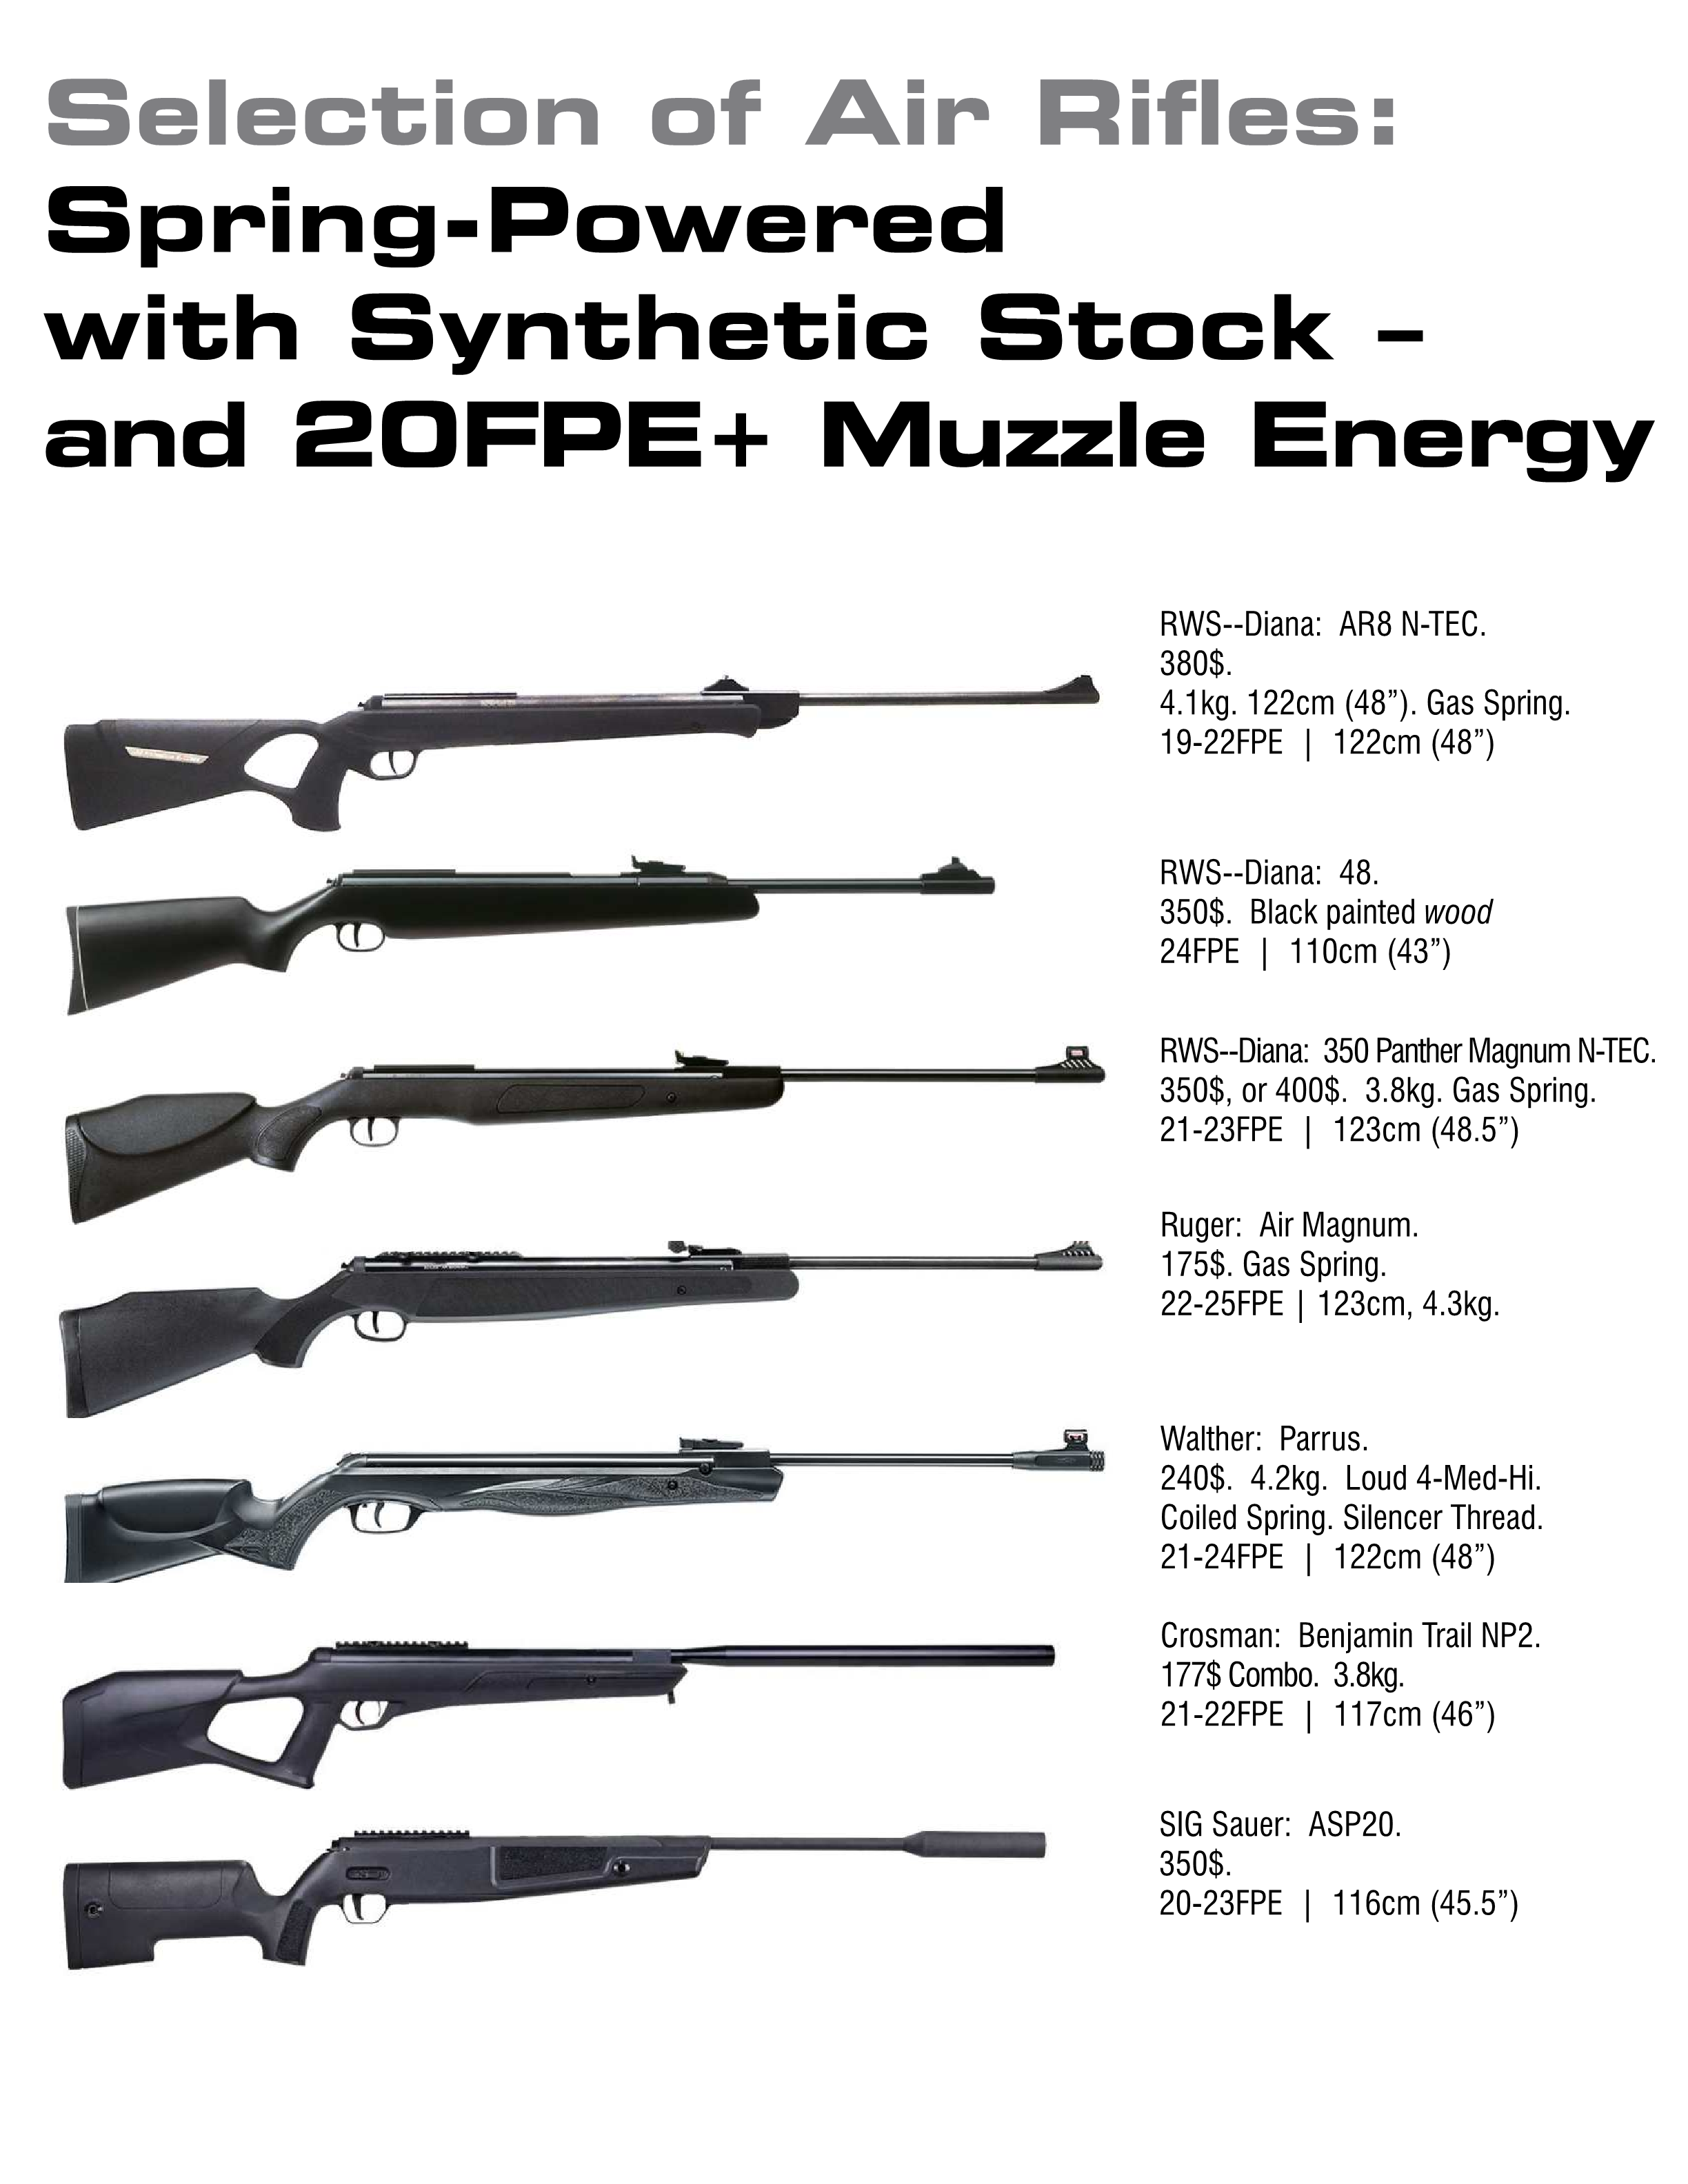 Springers.  Synthetic.  20FPE or more in .22cal.png